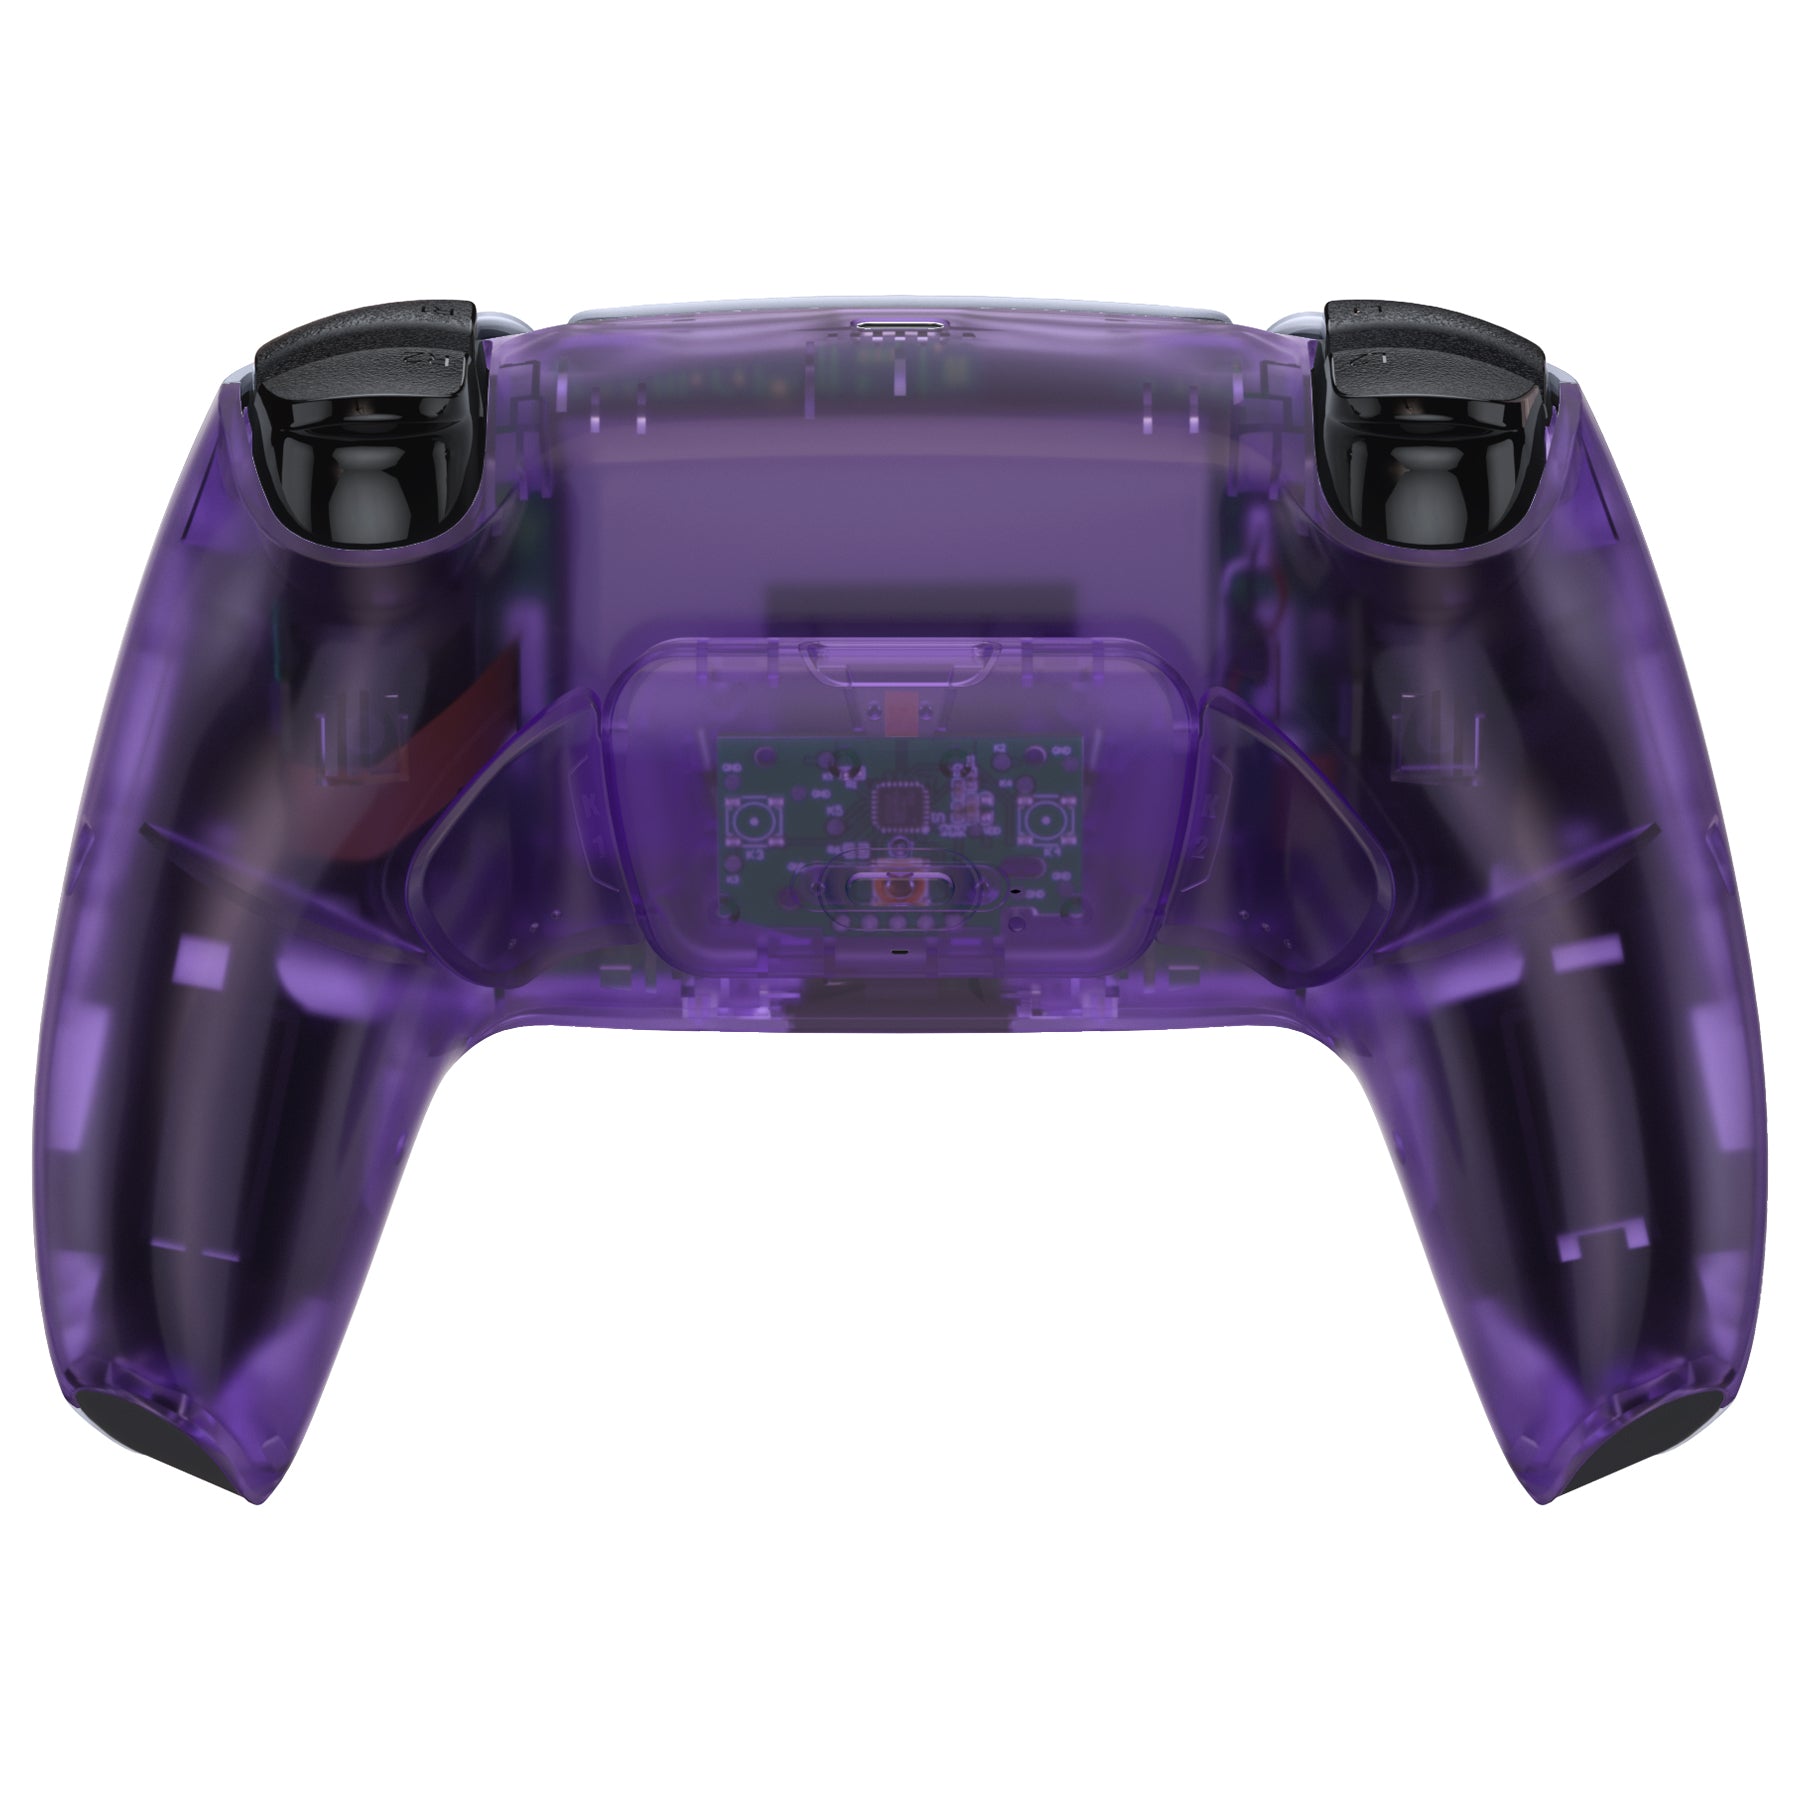 eXtremeRate Retail Clear Atomic Purple Back Paddles Remappable Rise Remap Kit with Upgrade Board & Redesigned Back Shell & Back Buttons Attachment for ps5 Controller BDM-010 & BDM-020 - XPFM5002G2